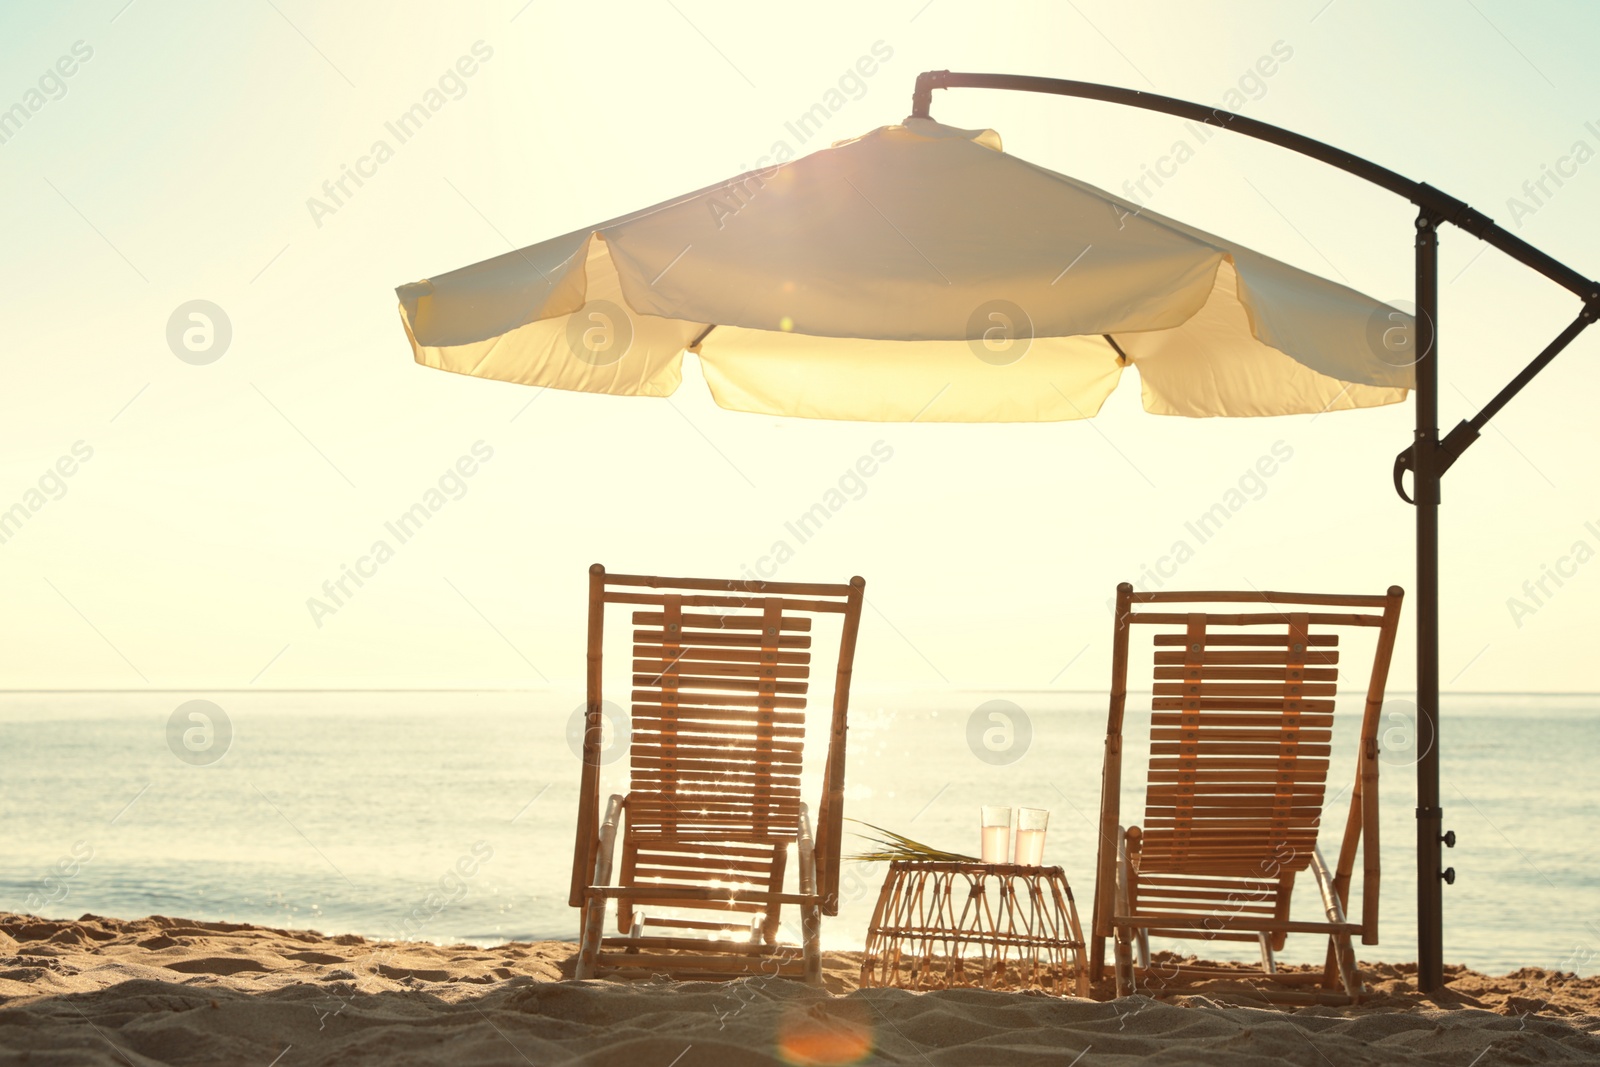 Photo of Wooden deck chairs, outdoor umbrella and table with cocktails on sandy beach. Summer vacation